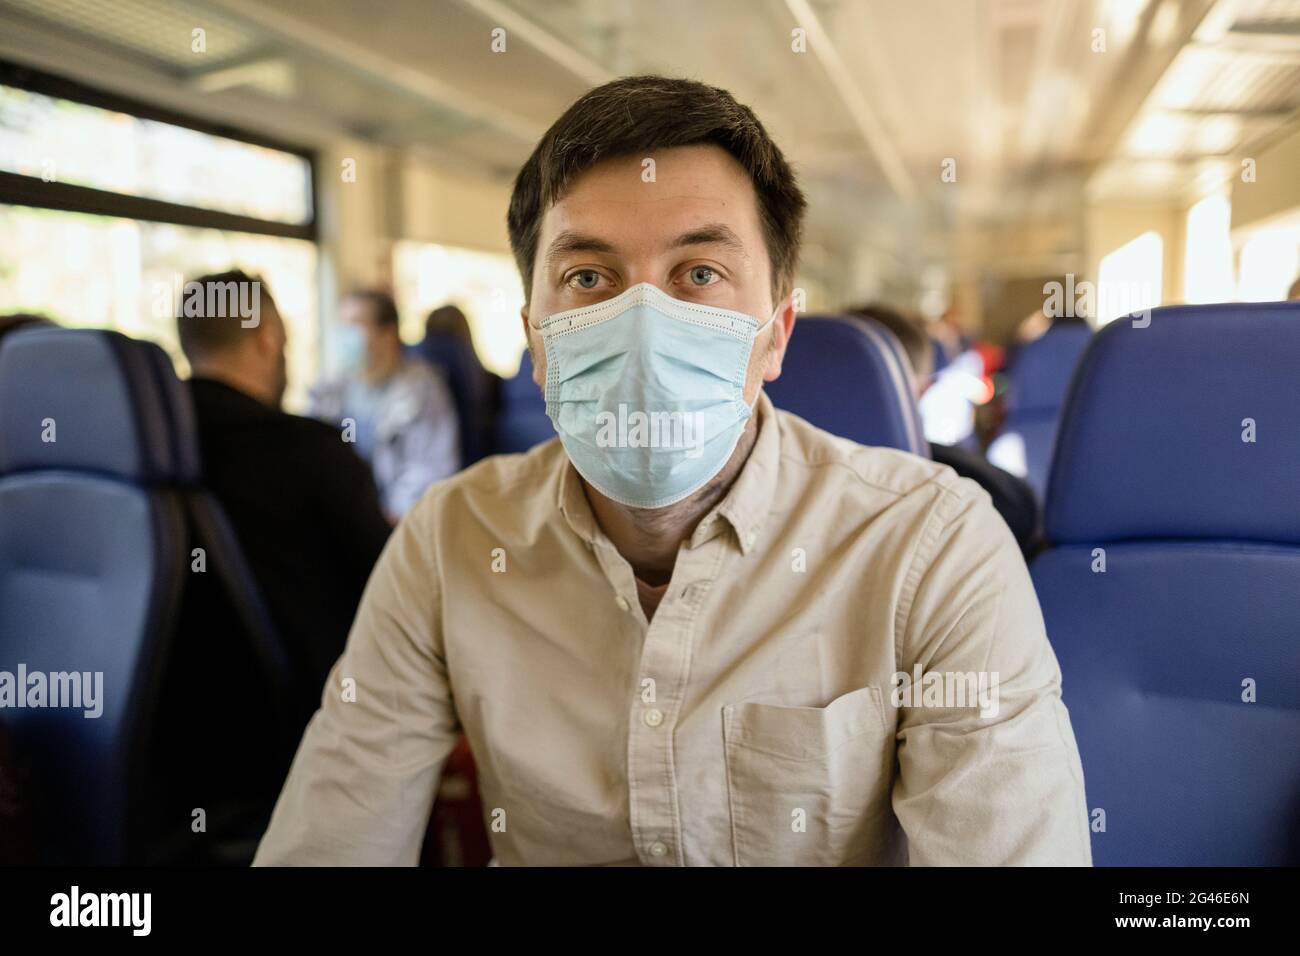 Male passenger wearing face mask during covid-19 lockdown inside train. New normal lifestyle concept. Social distancing when tra Stock Photo